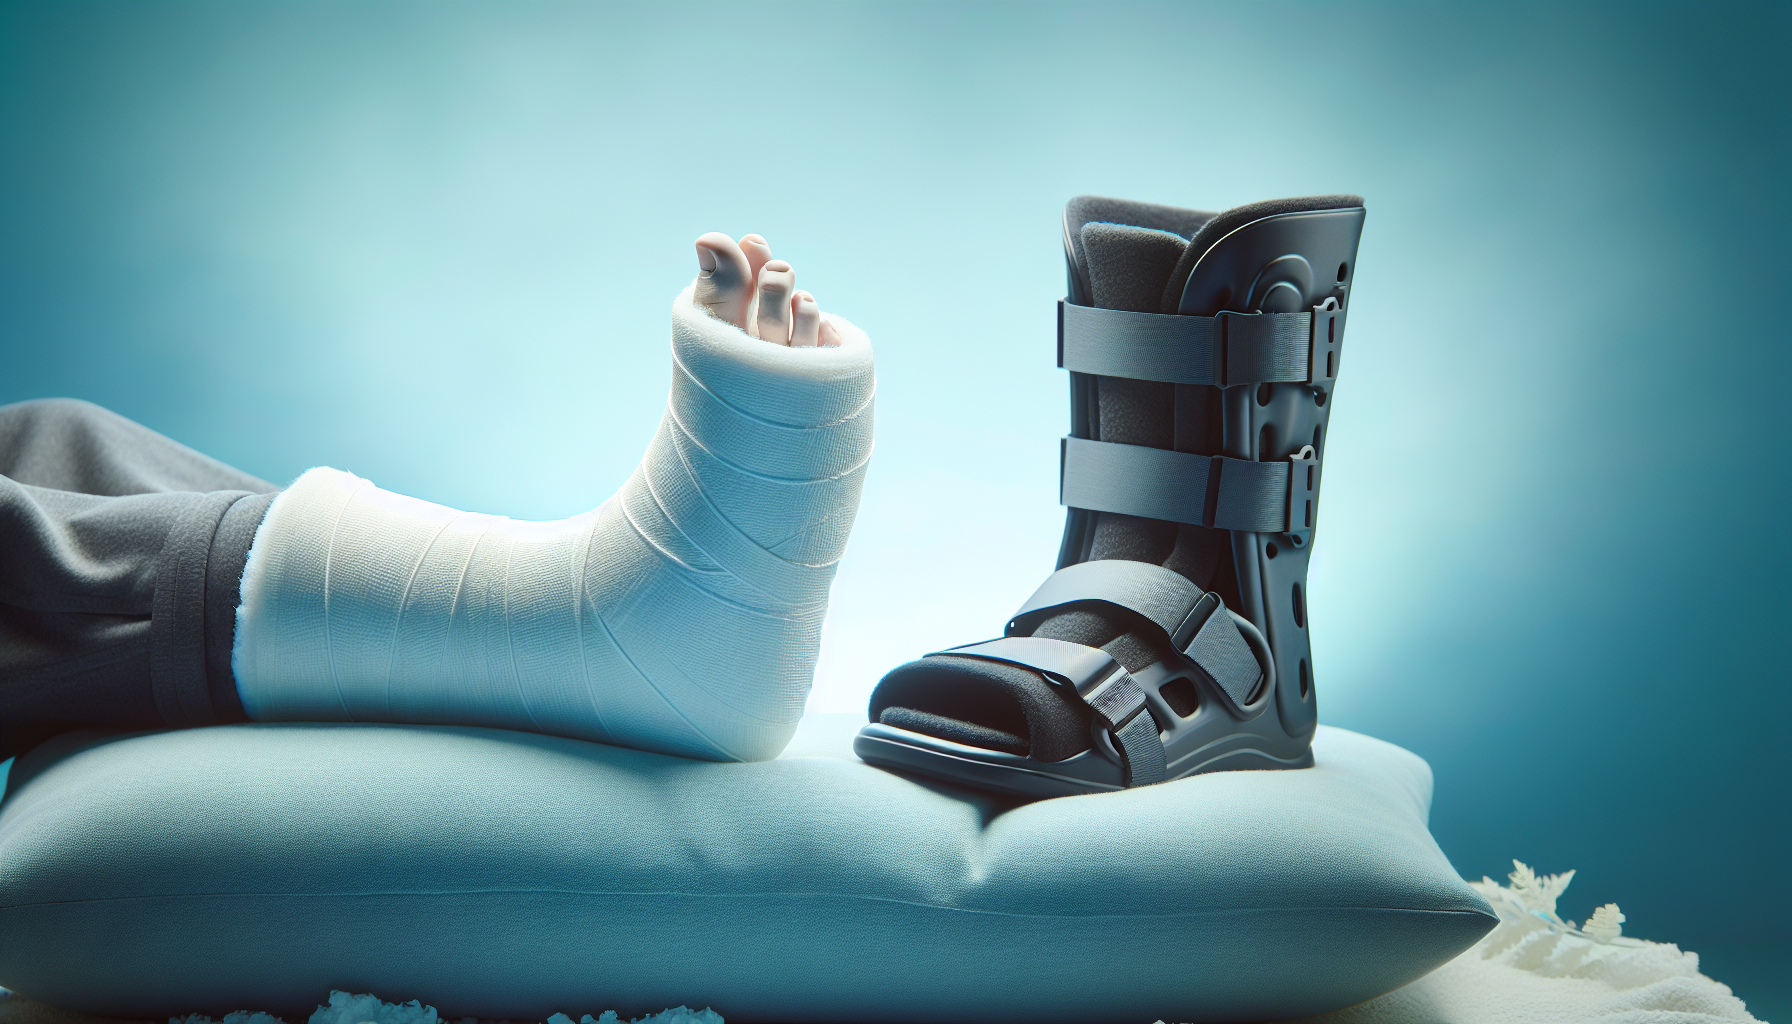 Illustration of a foot in a cast and removable boot